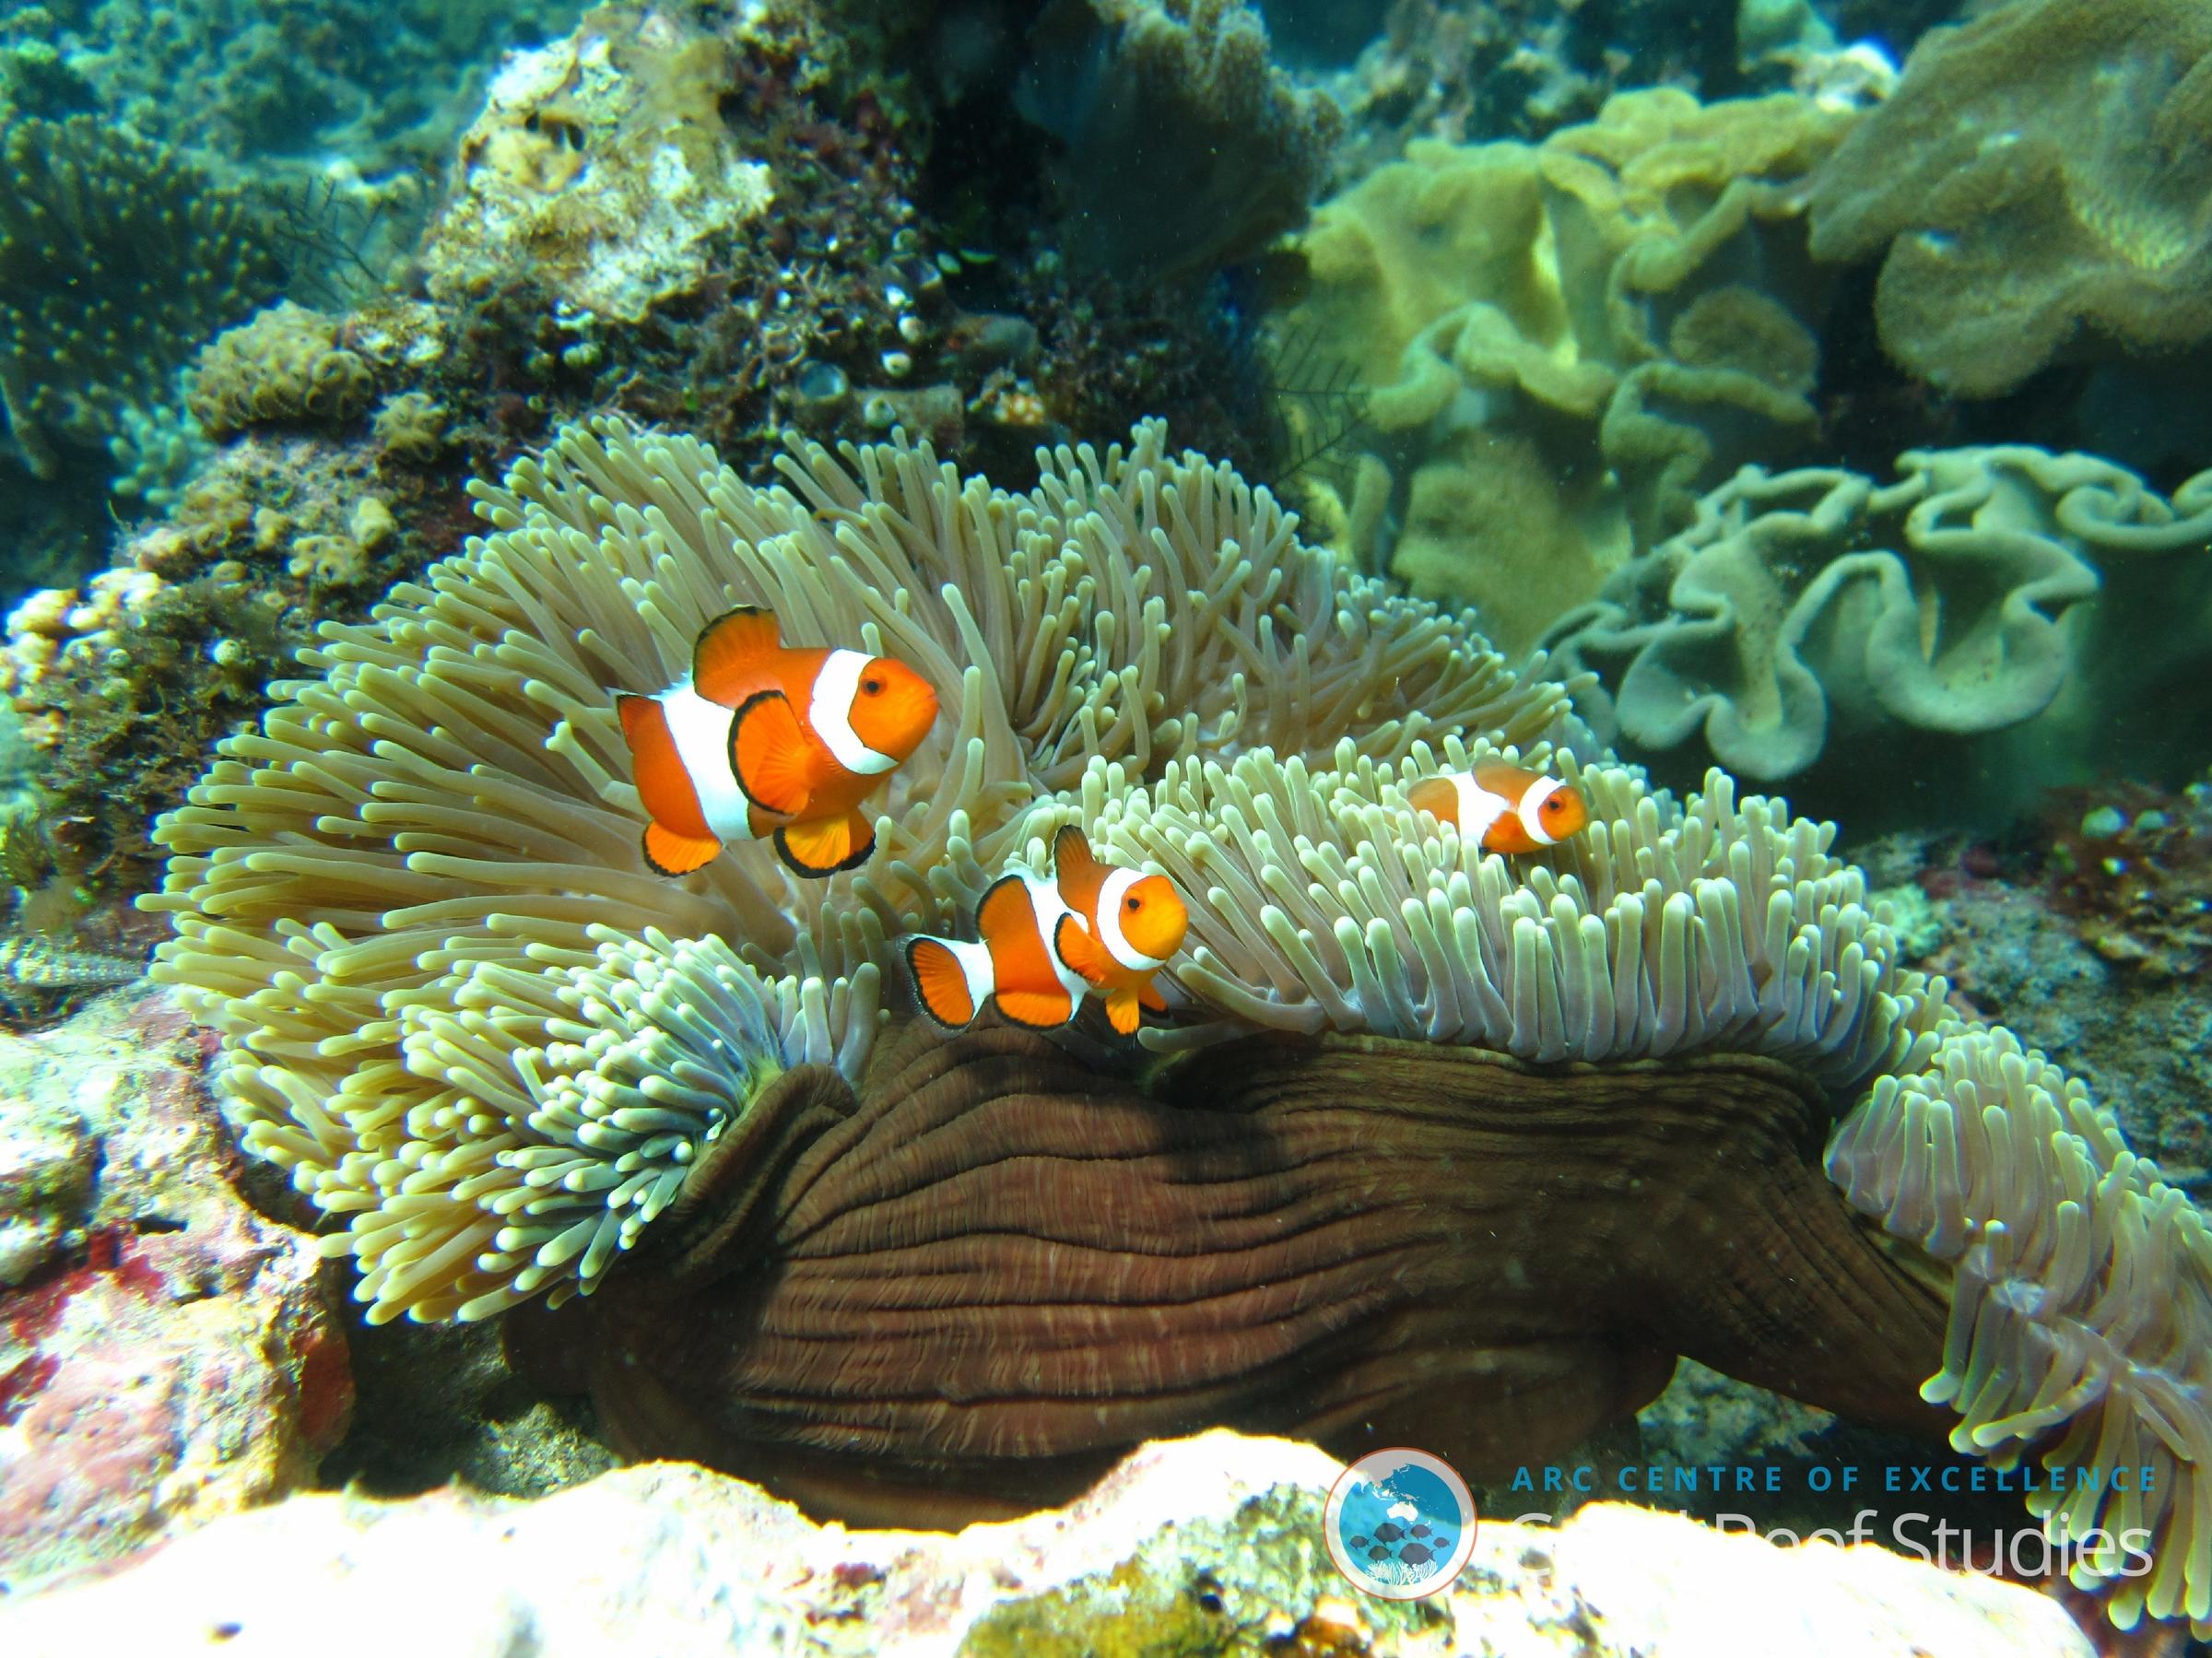 Coral Reef Fish Are More Resilient Than We Thought, Study Finds | WFSU